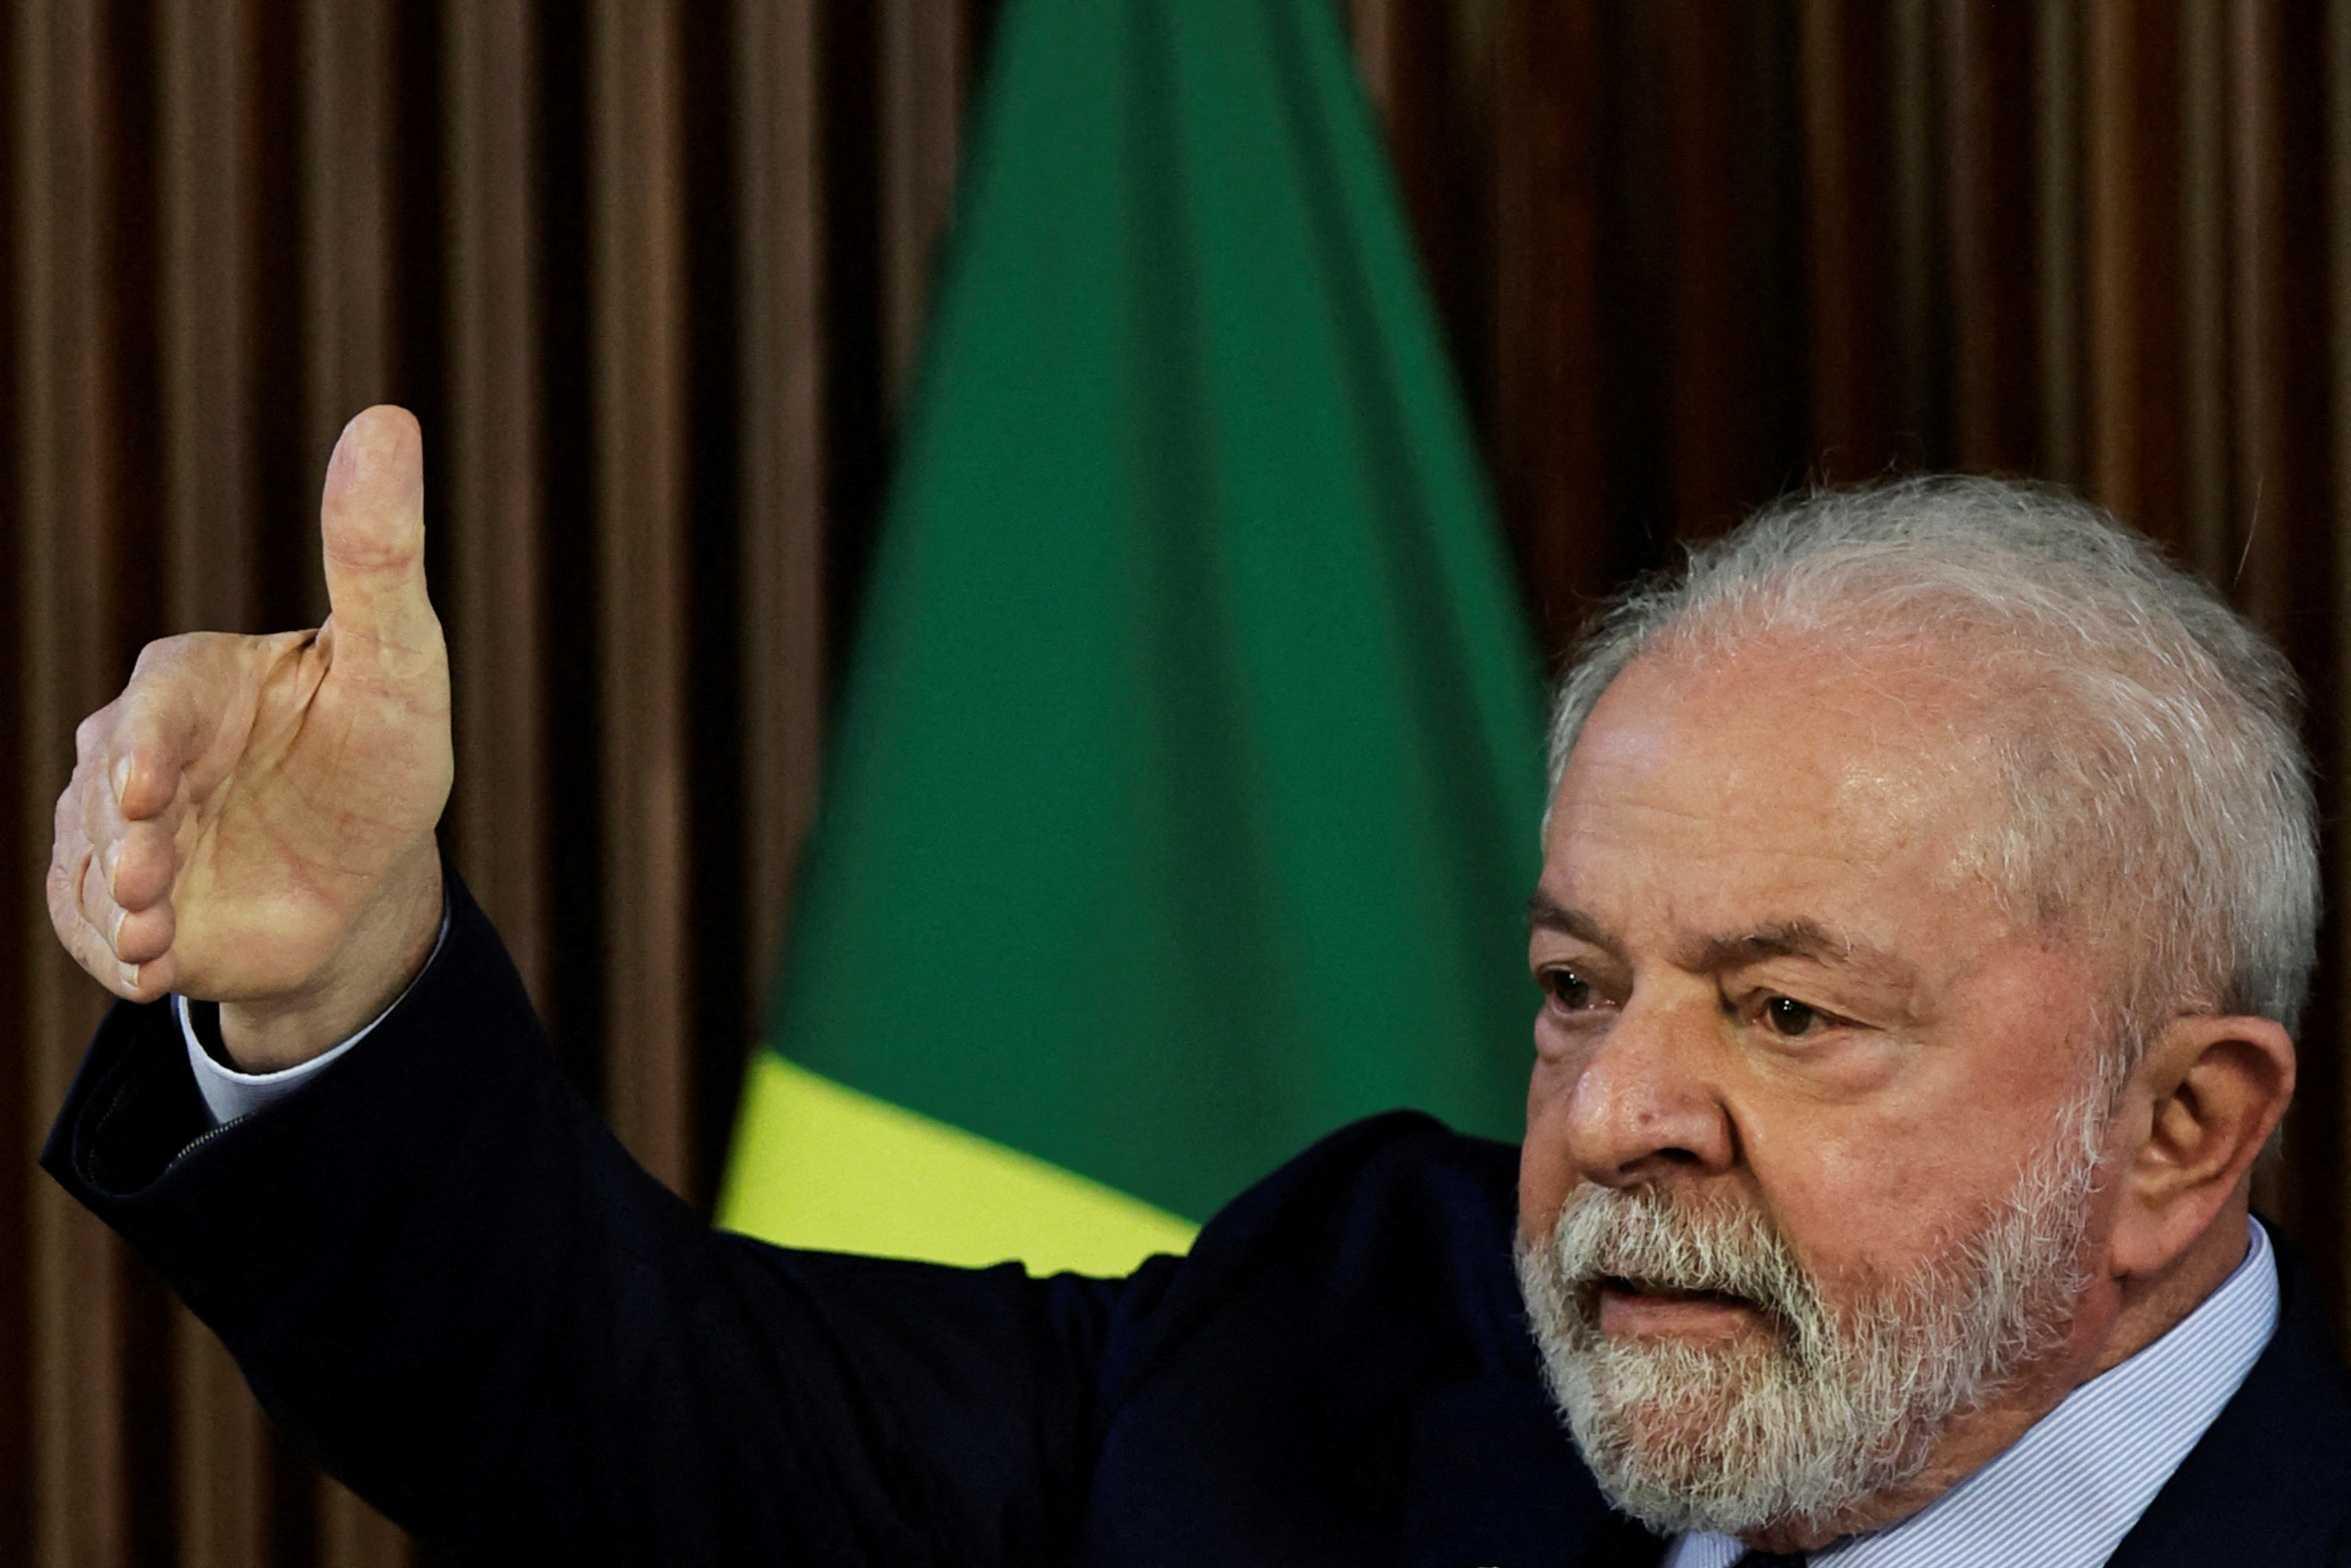 2023-02-06T160809Z_1126244804_RC21ZY9RSF9T_RTRMADP_3_BRAZIL-ECONOMY-RATES-LULA